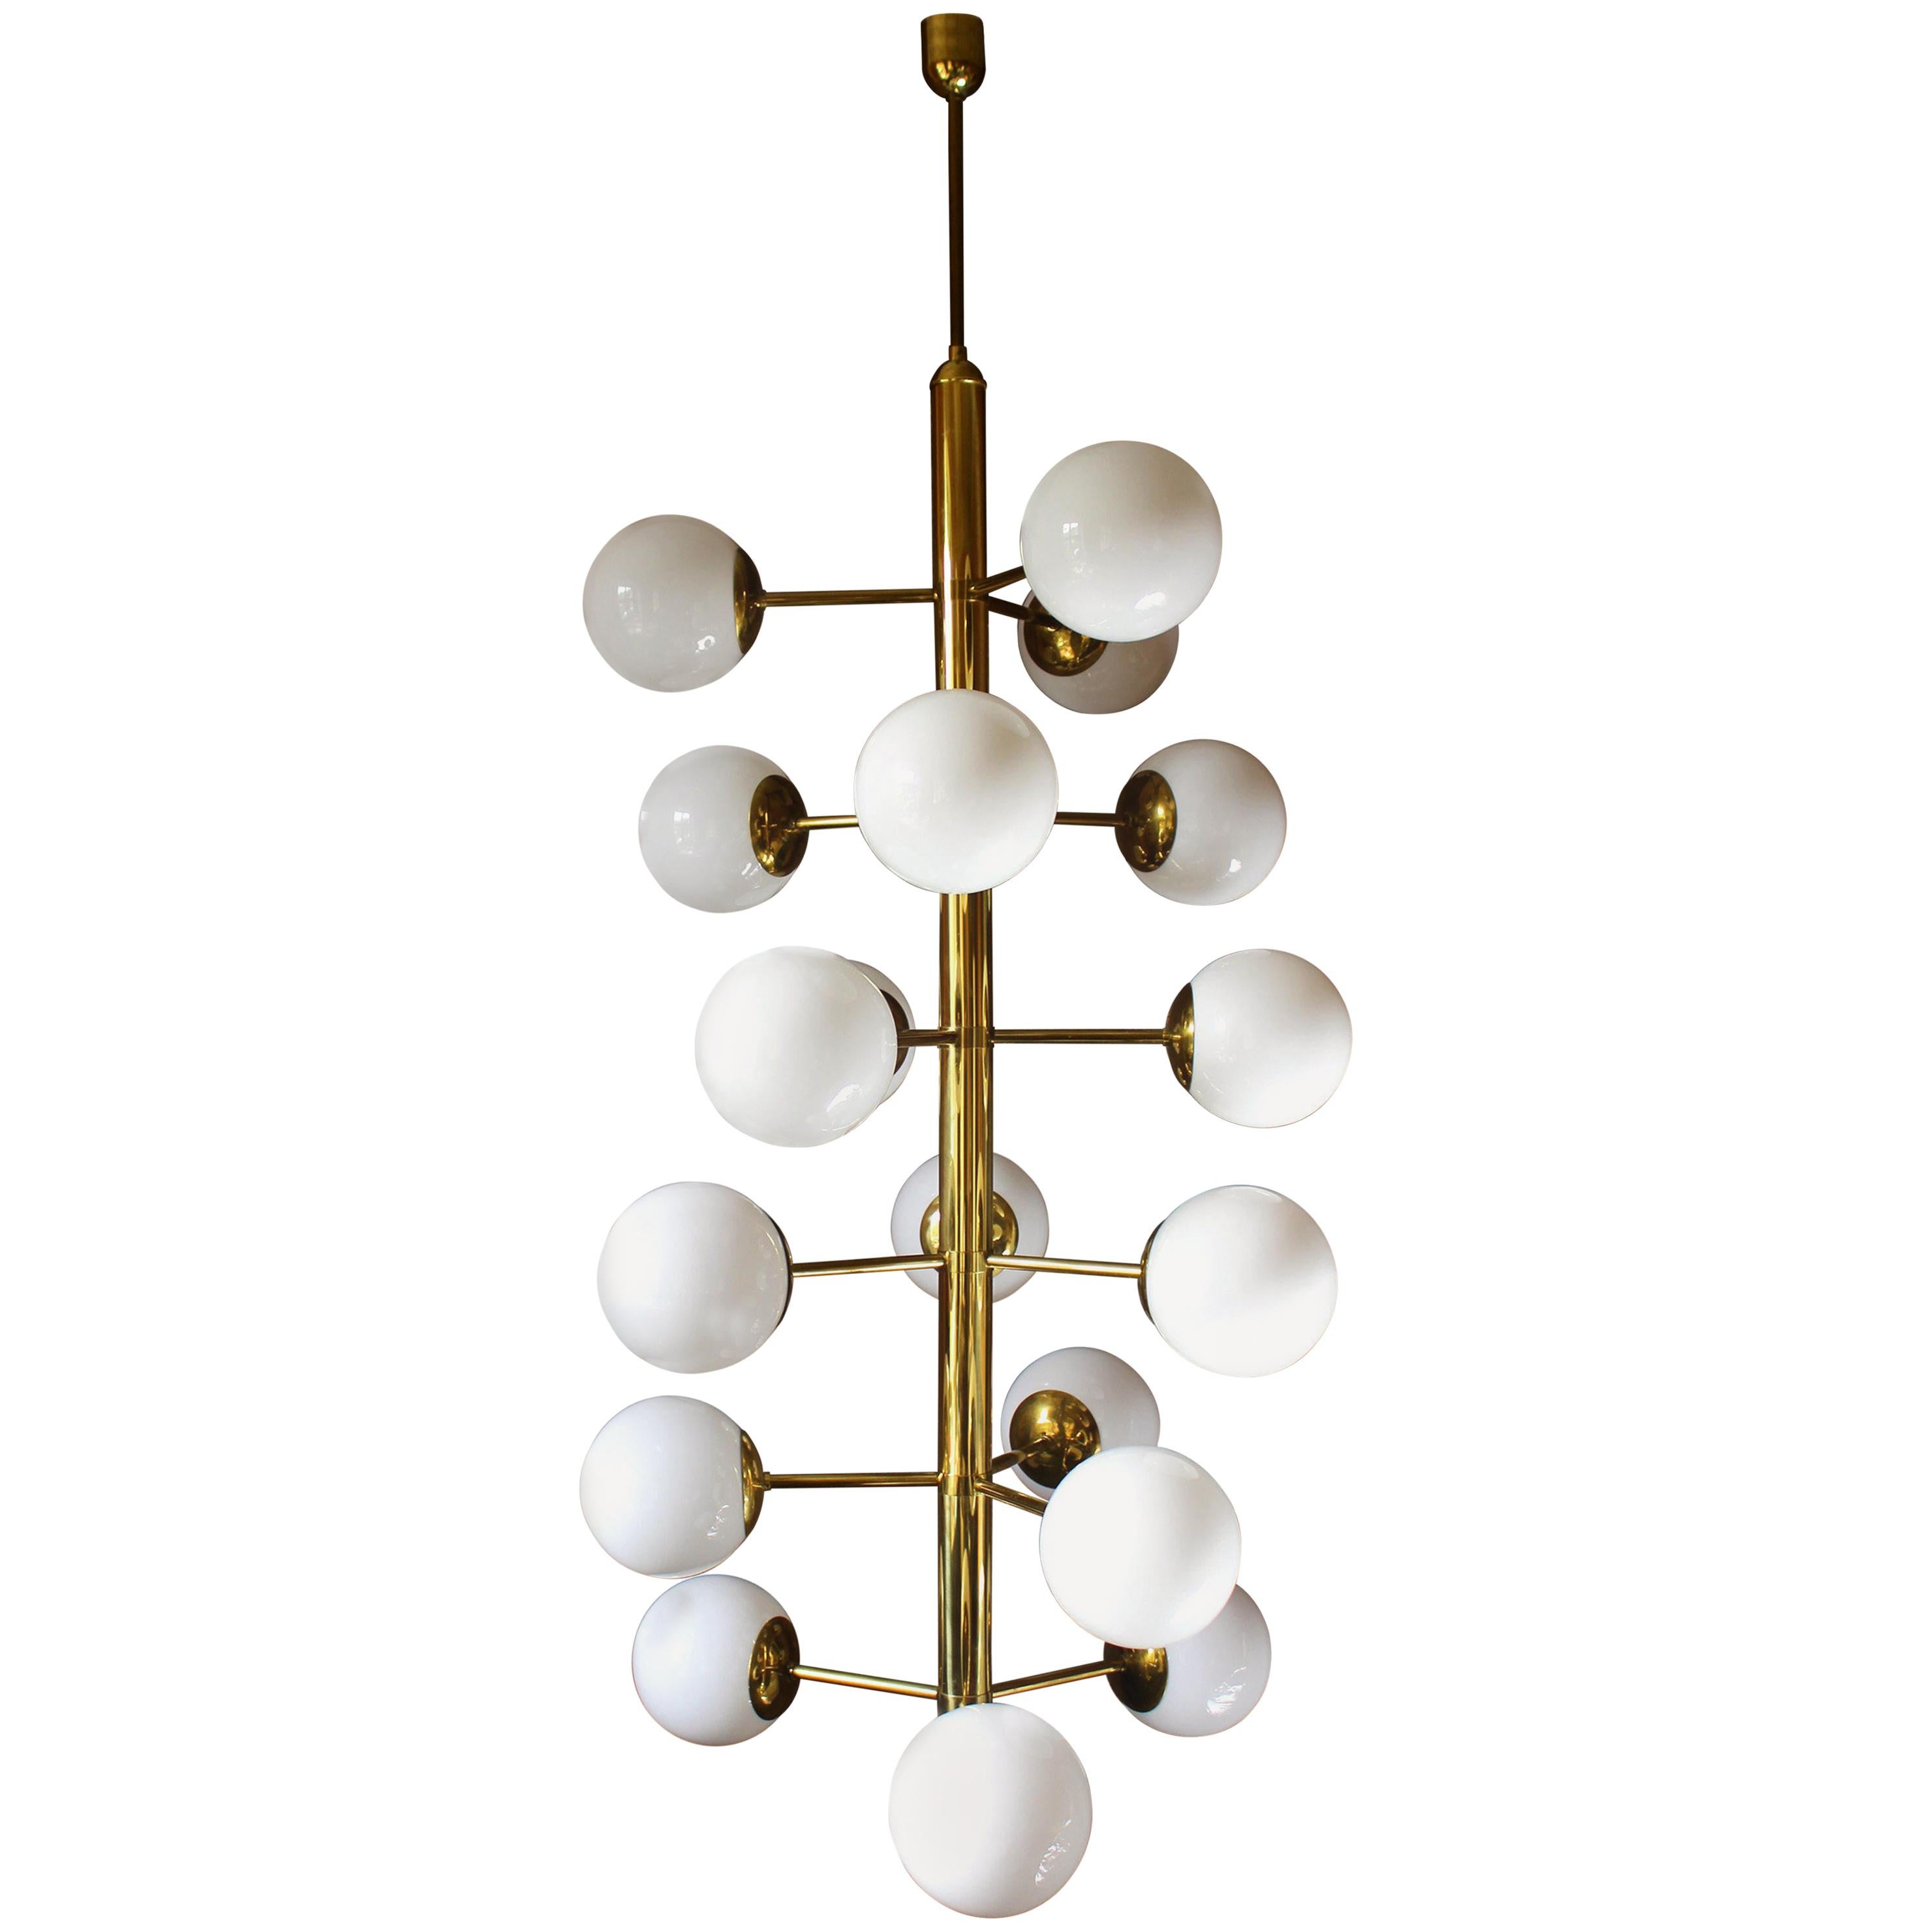 1 of 4 Gigantic Brass Opal Glass Chandelier, Germany, 1970s For Sale